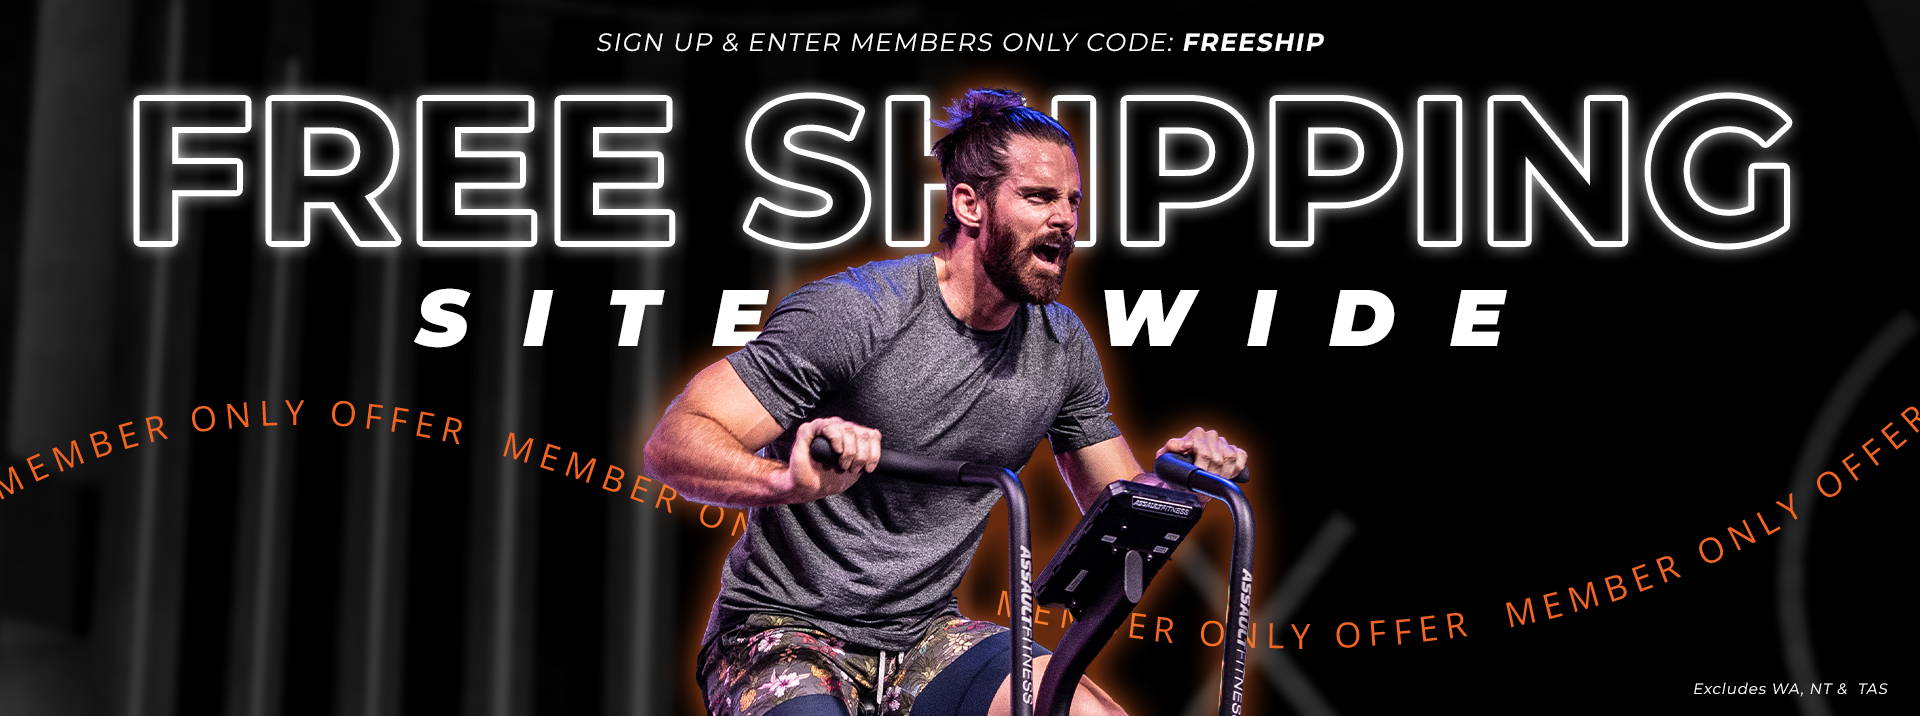 Free Shipping Site Wide For Members - Sign Up Now